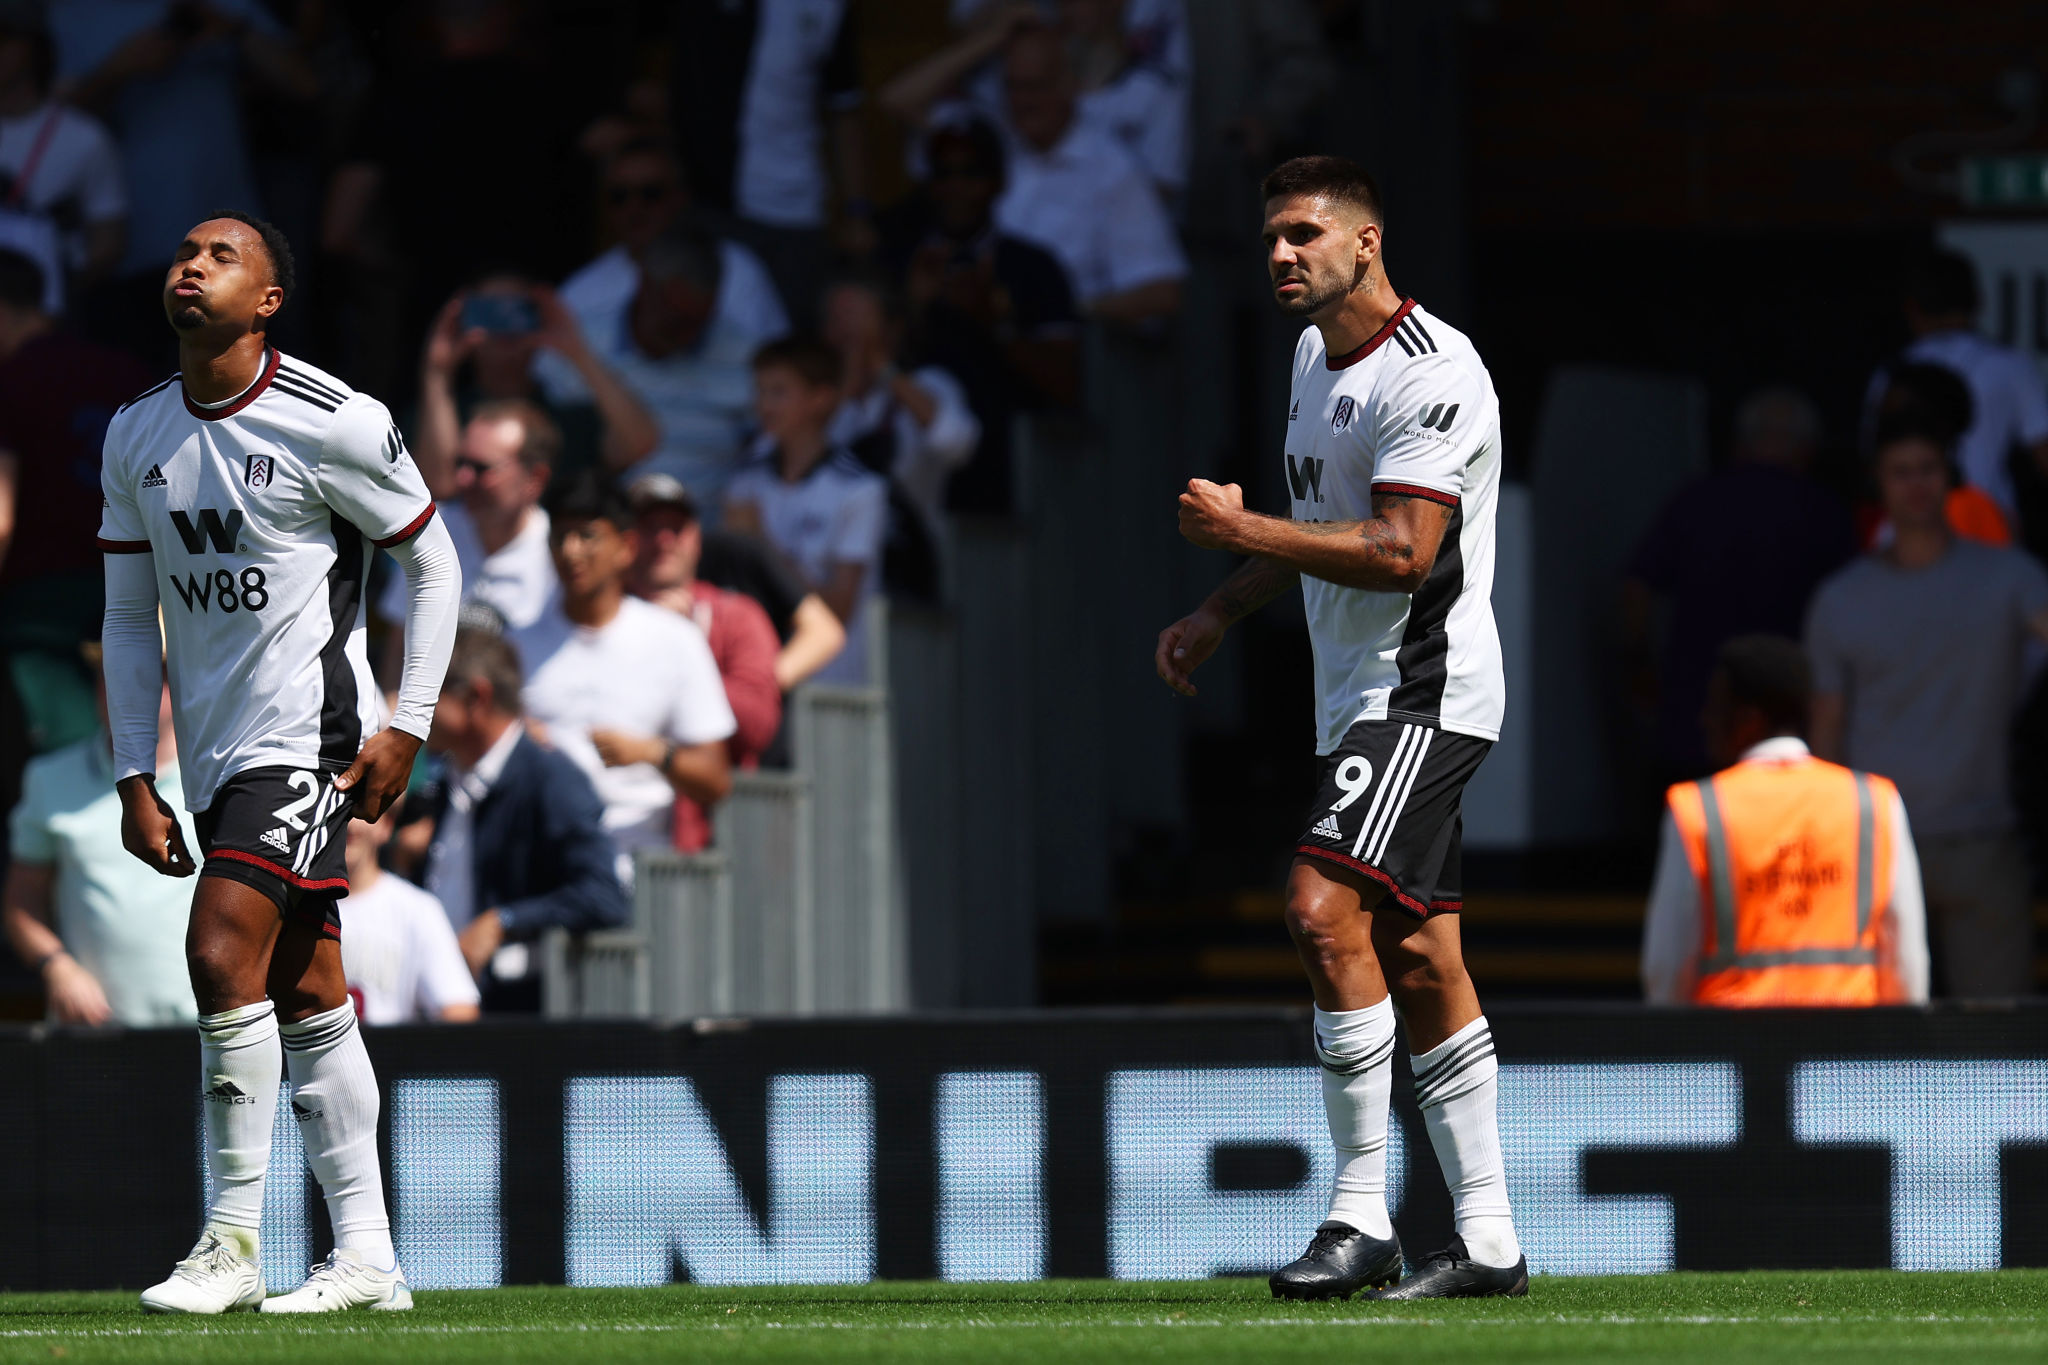 Fulham vs Liverpool Highlights: FUL 2-2 LIV, Mohamed Salah's equaliser helps Liverpool claim a 2-2 draw at Craven Cottage, Mitrovic and Salah with the goals, Check Fulham vs Liverpool HIGHLIGHTS